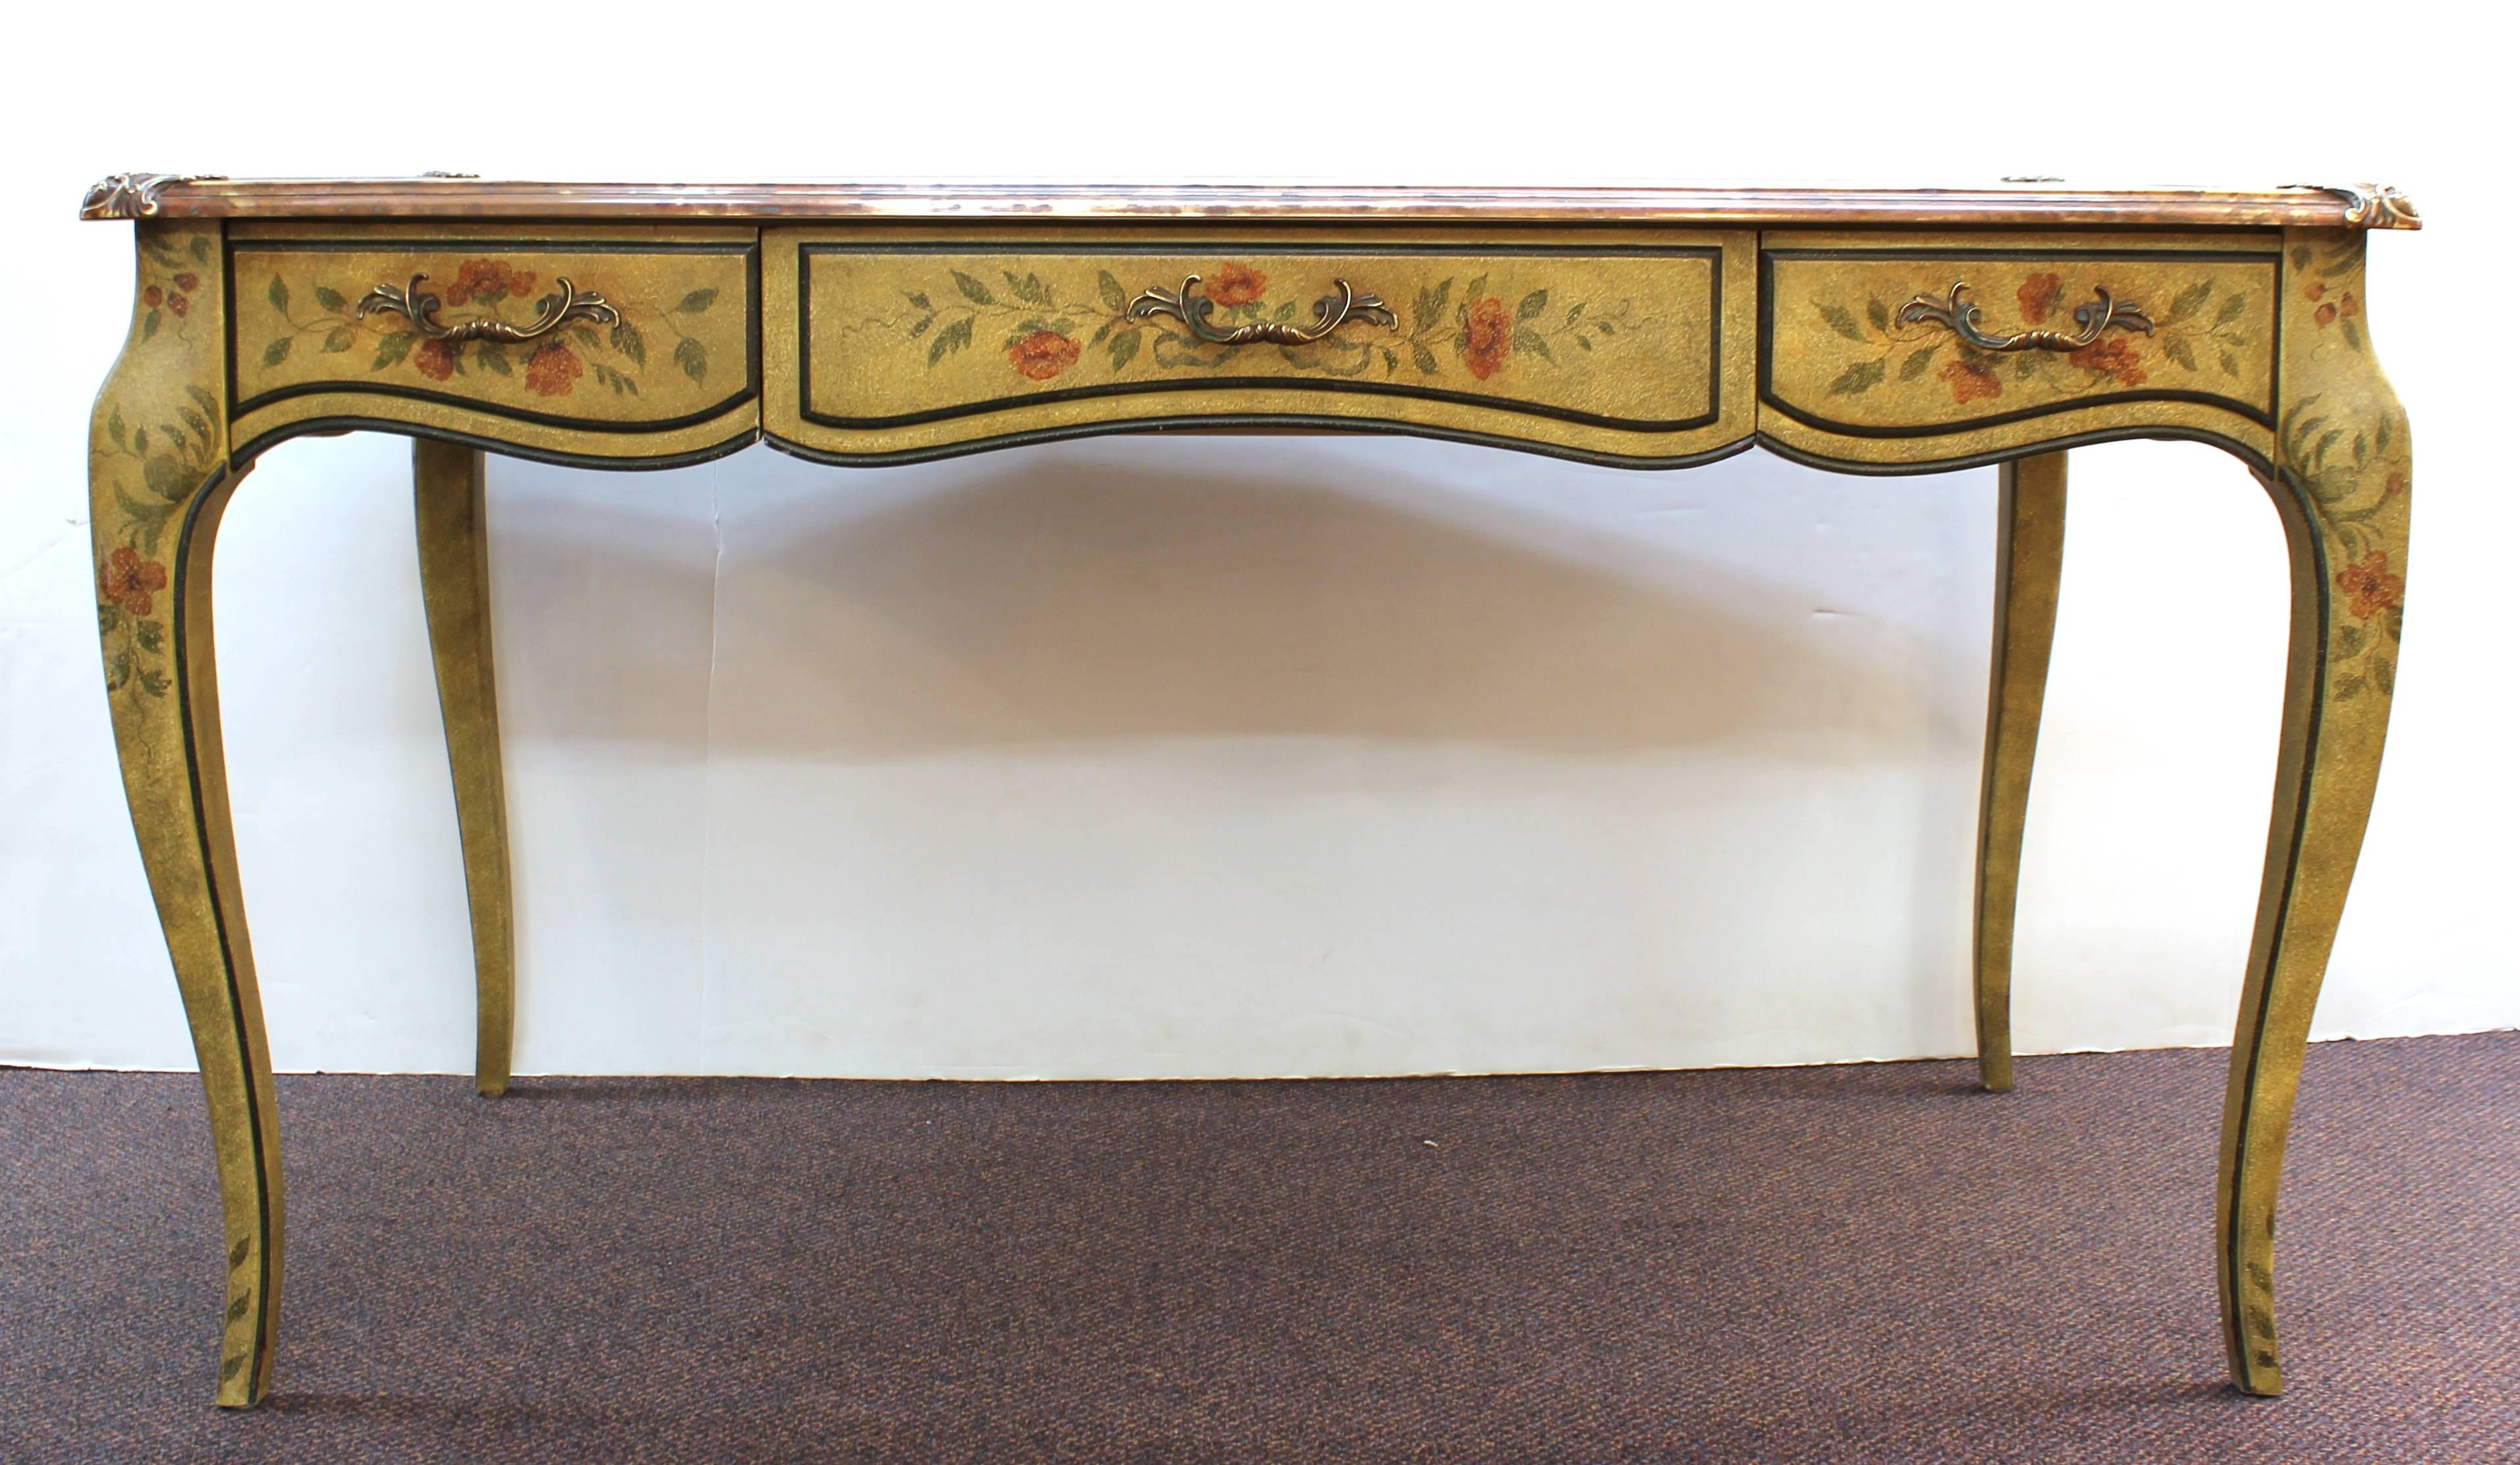 A baroque style writing desk made by Baker Furniture, with a decorative floral and foliage background and a leather top set inside a patinated brass frame. The front has three dovetailed drawers. In good vintage condition with age appropriate wear